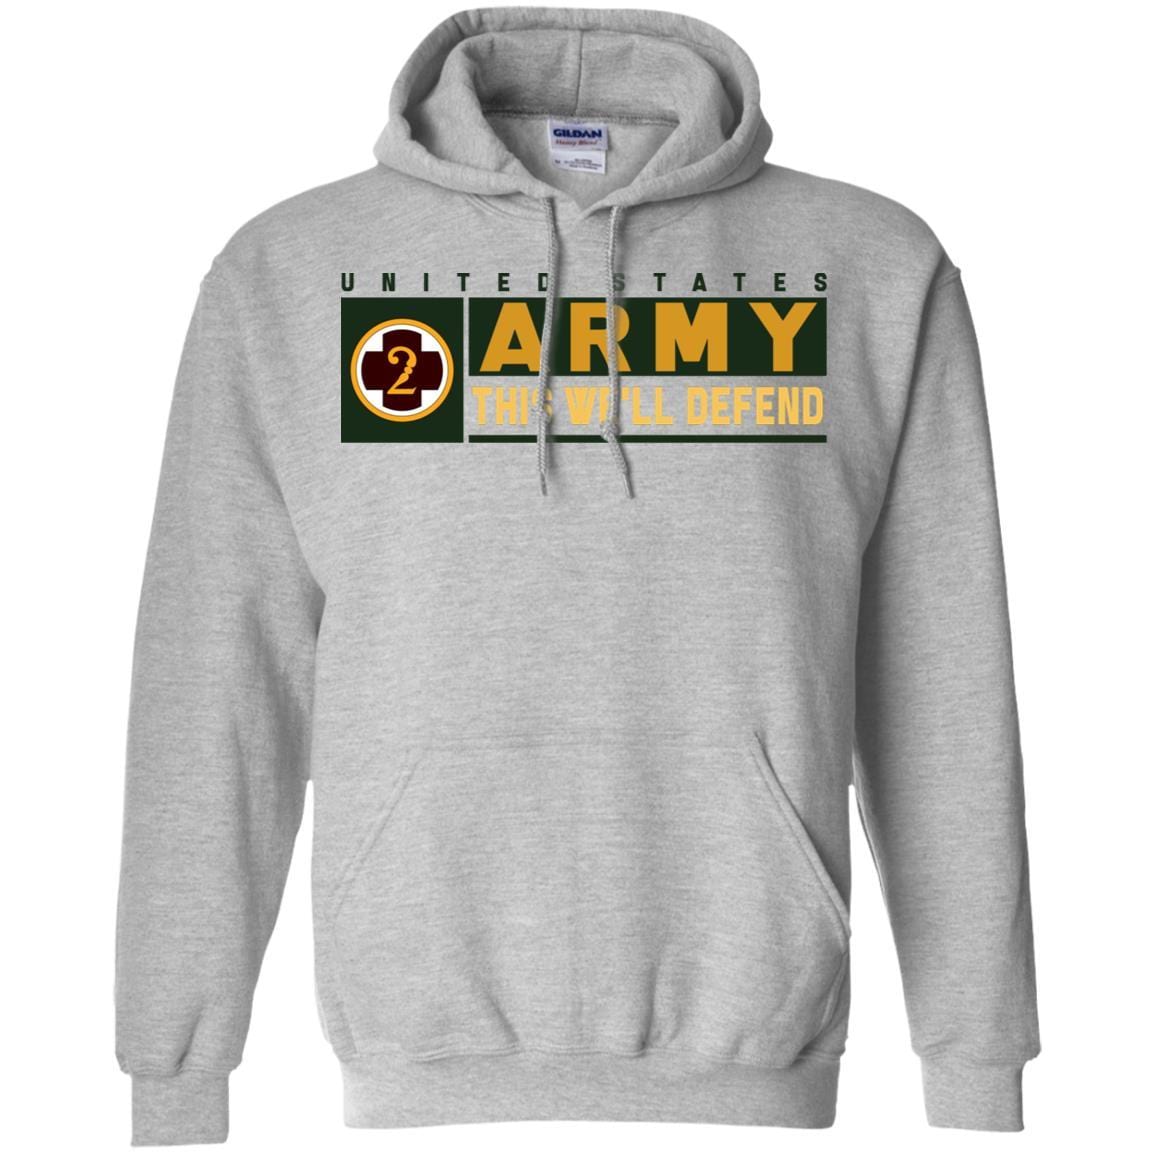 US Army 2ND MEDICAL BRIGADE- This We'll Defend T-Shirt On Front For Men-TShirt-Army-Veterans Nation